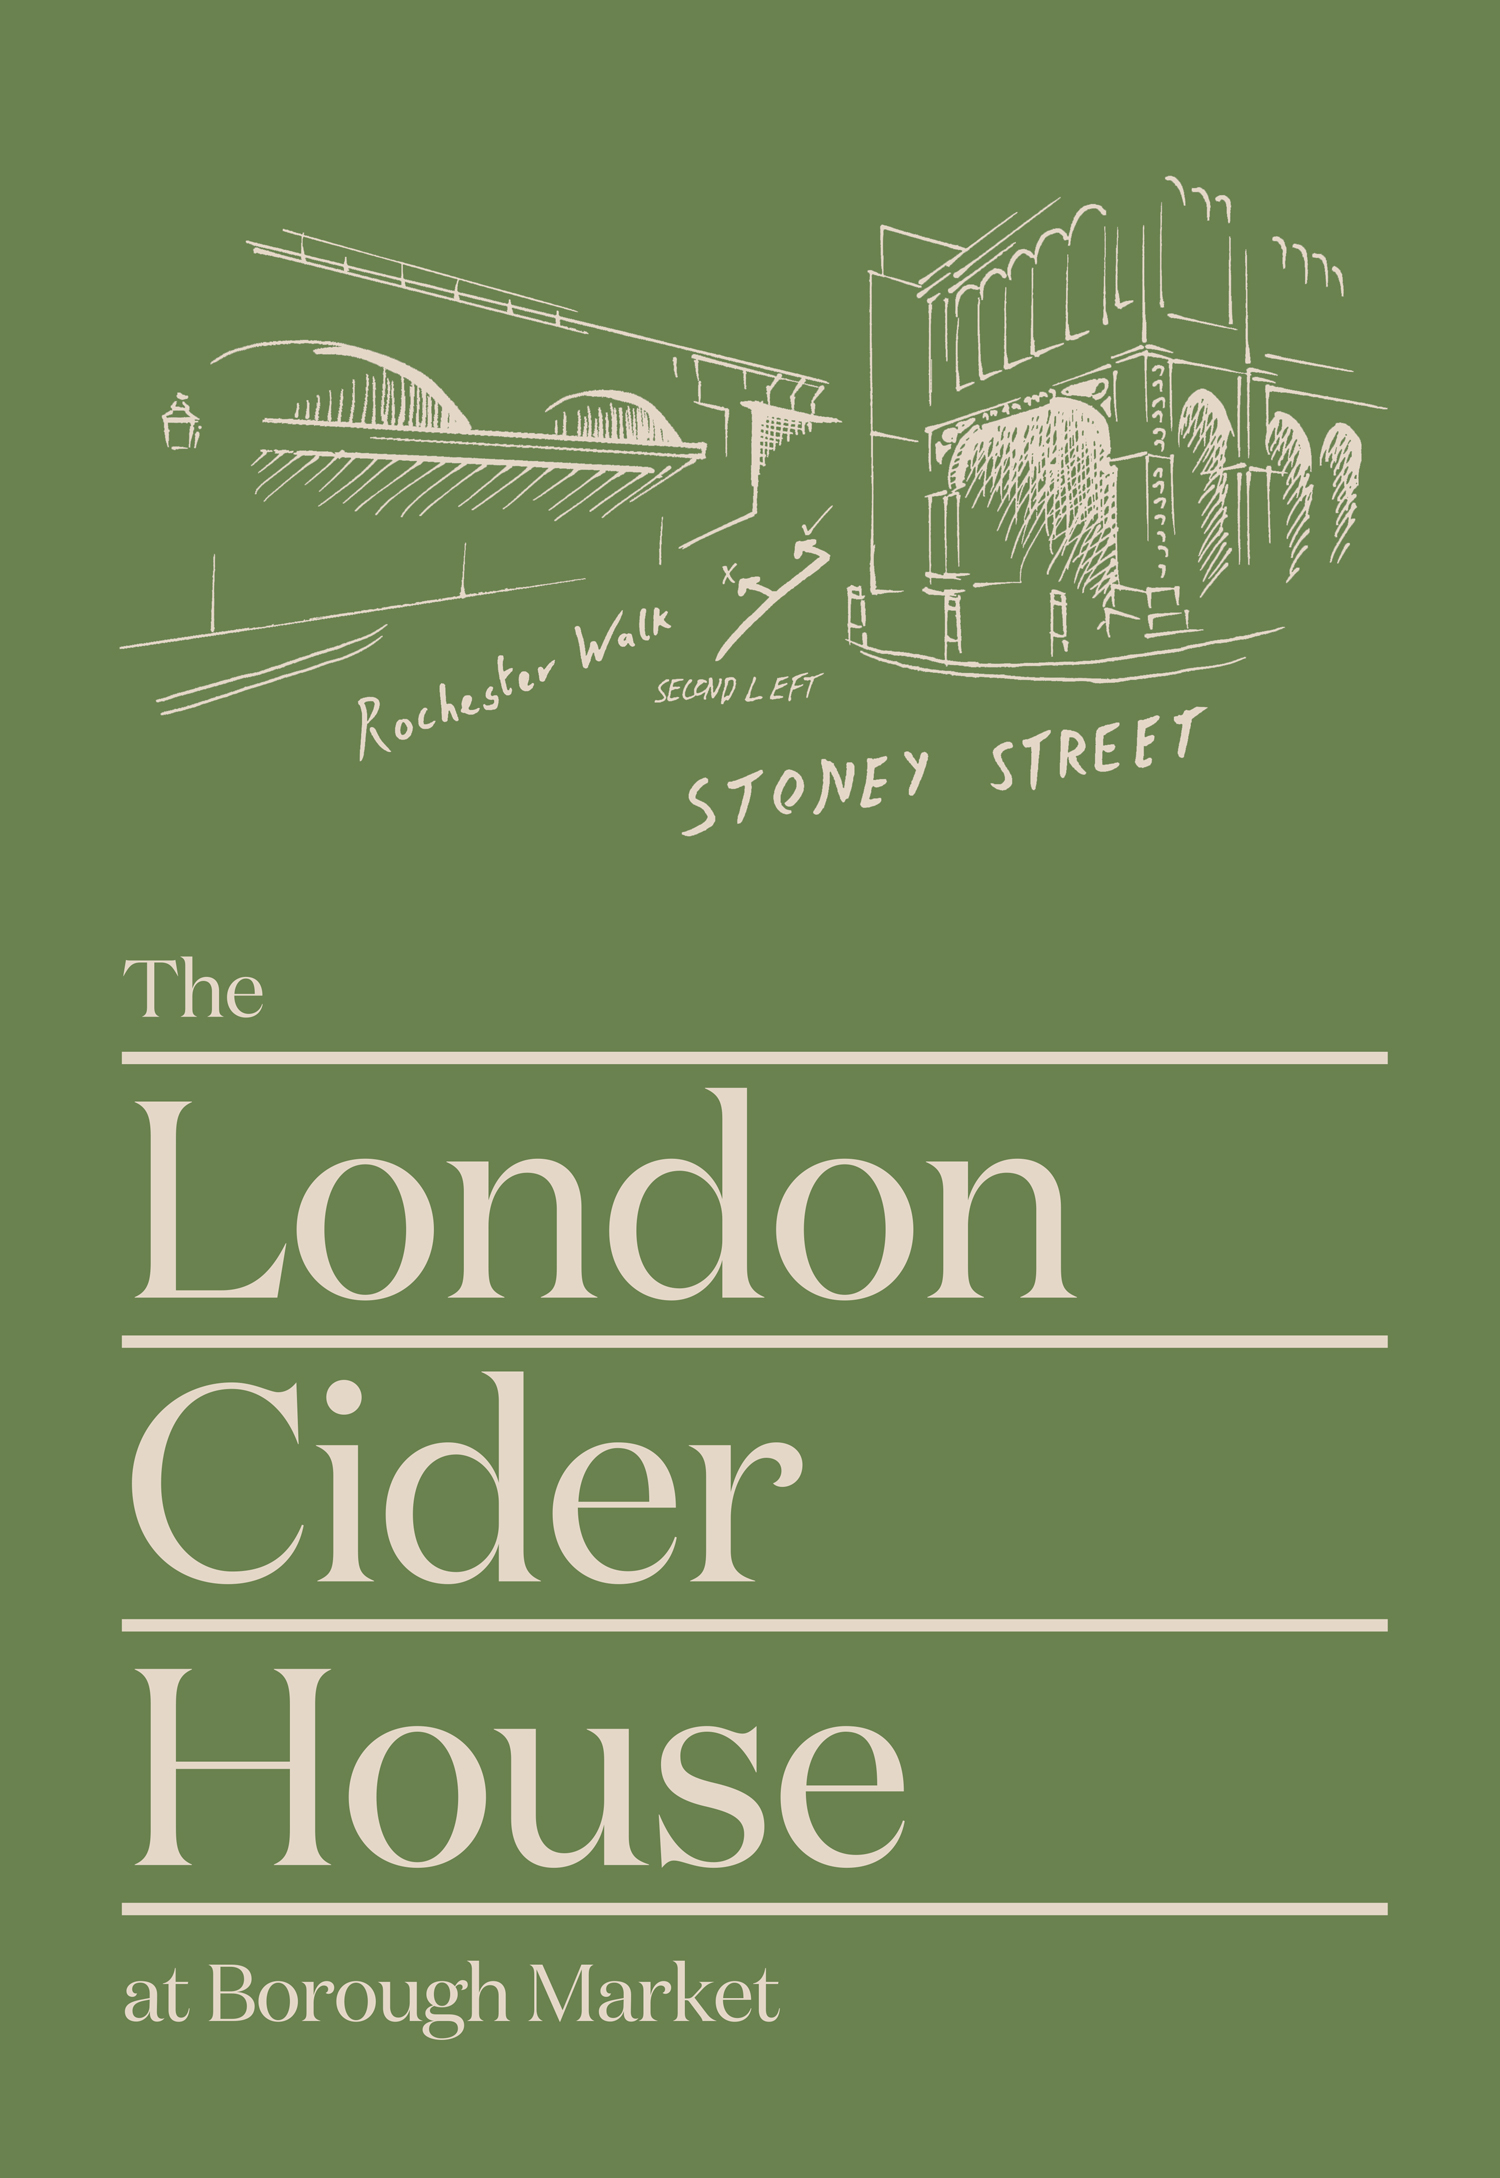 THE LONDON CIDER HOUSE at Borough Market